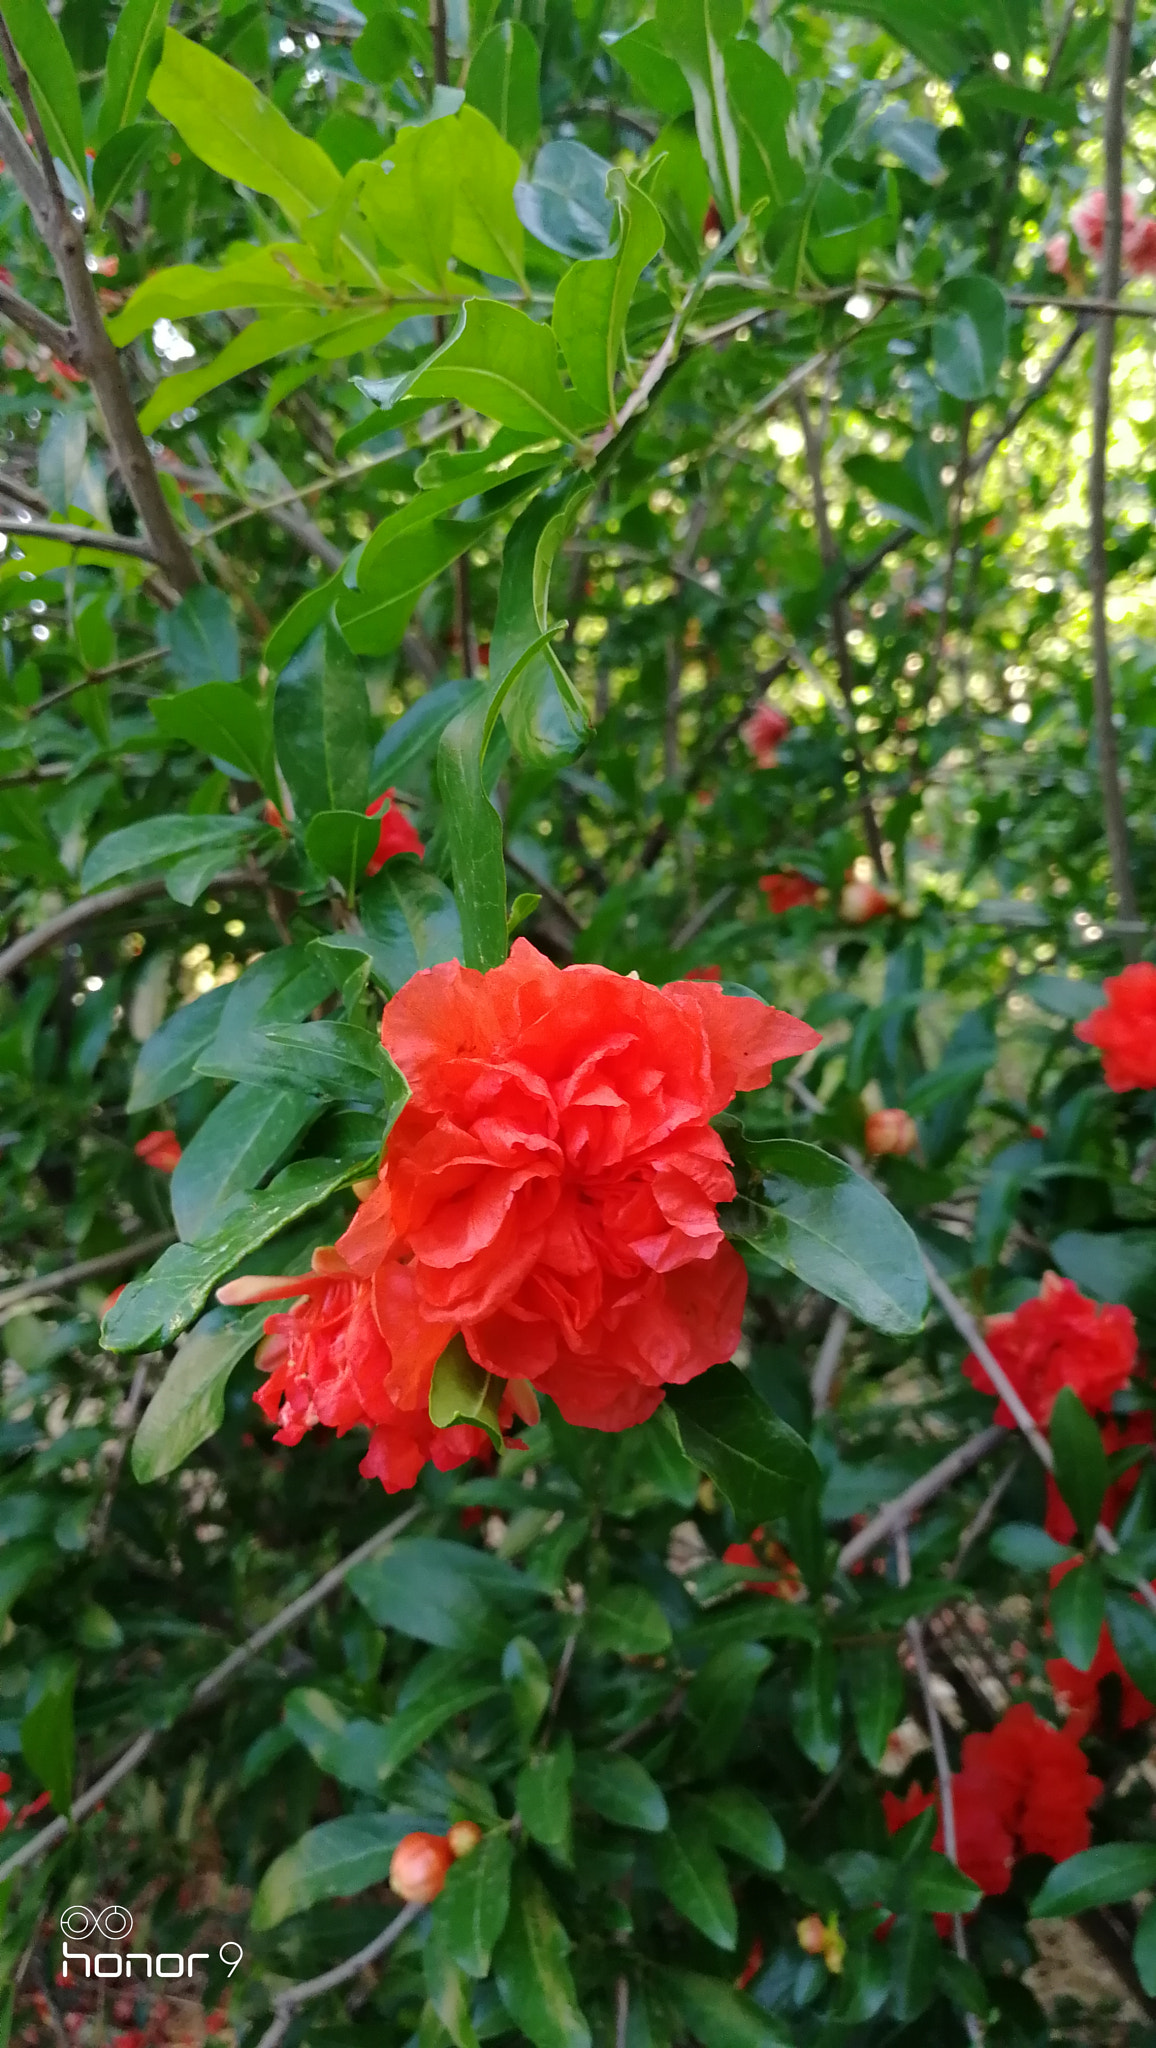 HUAWEI Honor 9 sample photo. Beautiful day.. the flowers photography